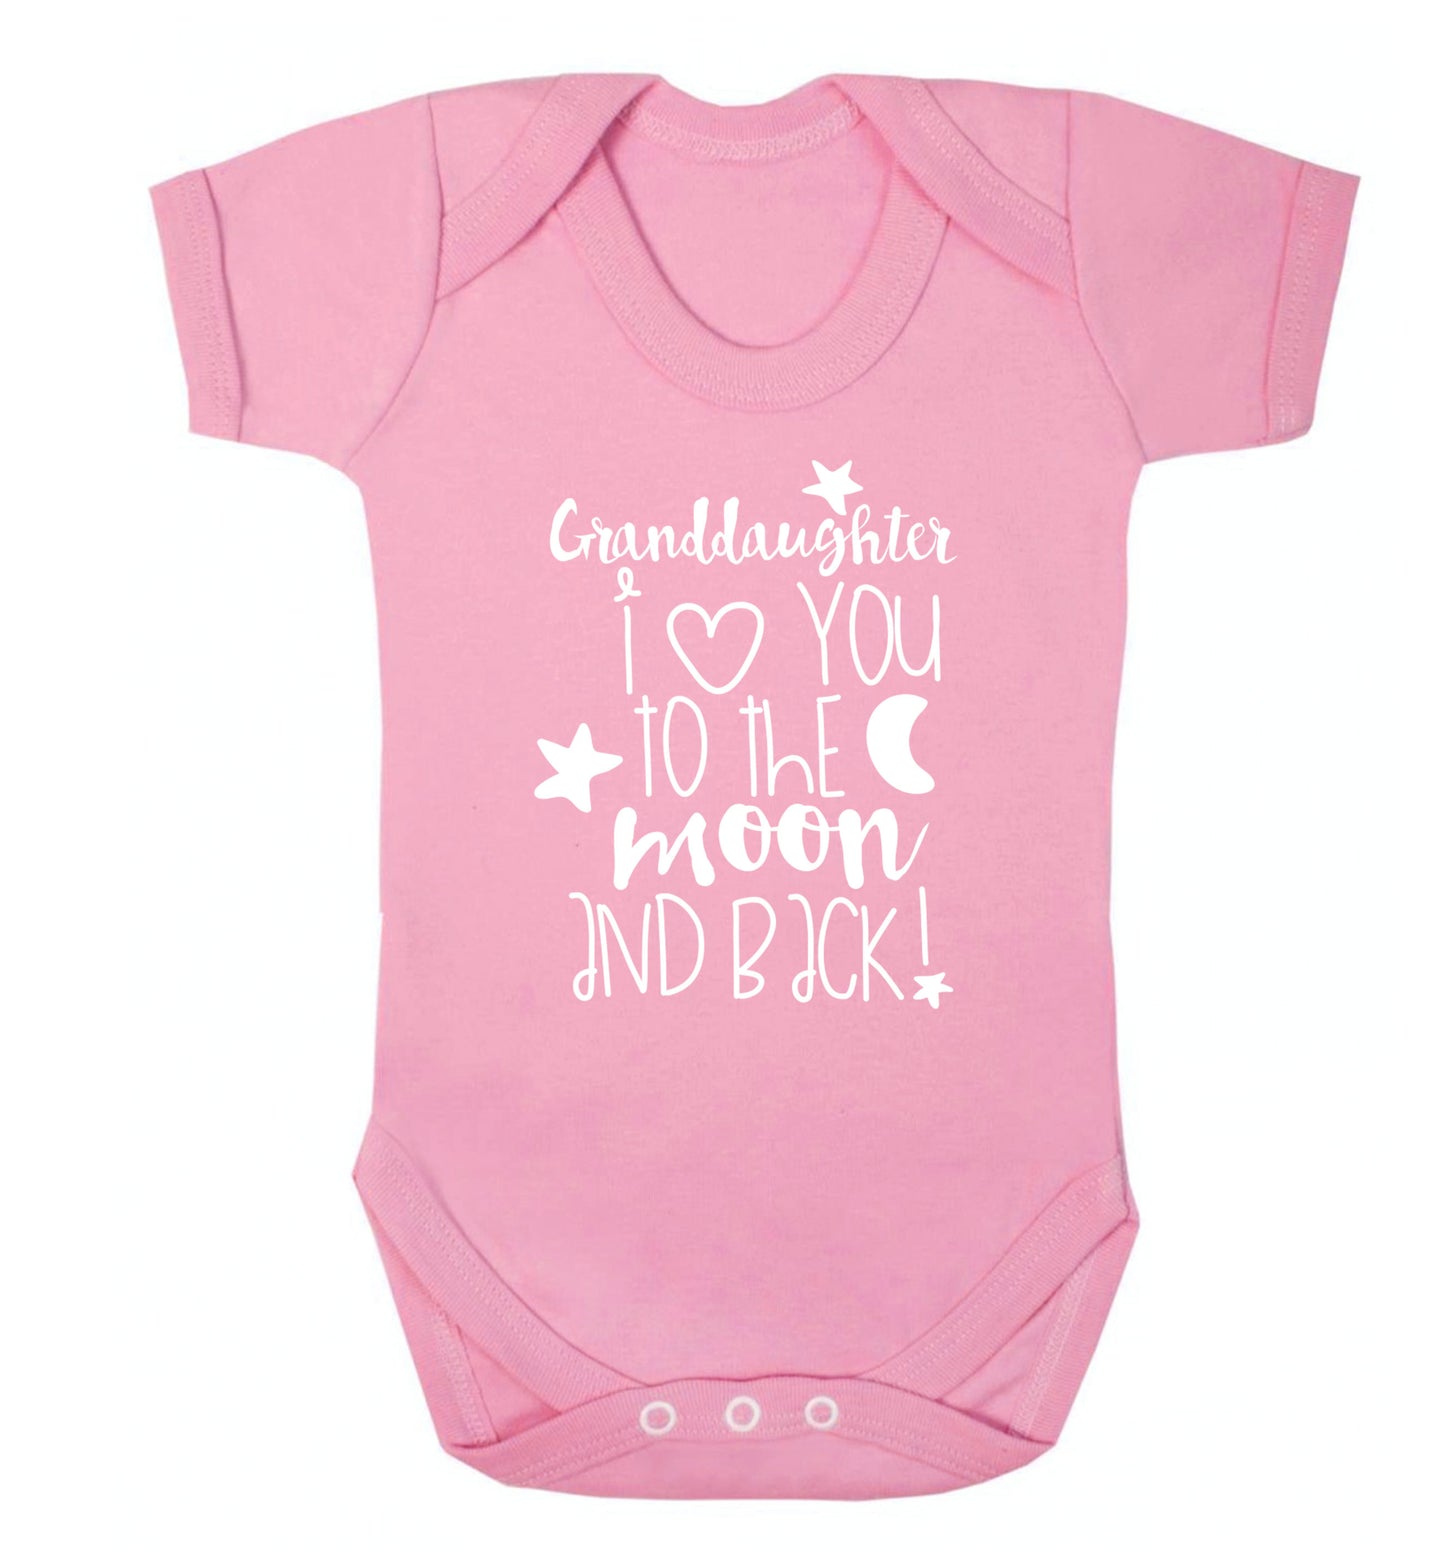 Granddaughter I love you to the moon and back Baby Vest pale pink 18-24 months